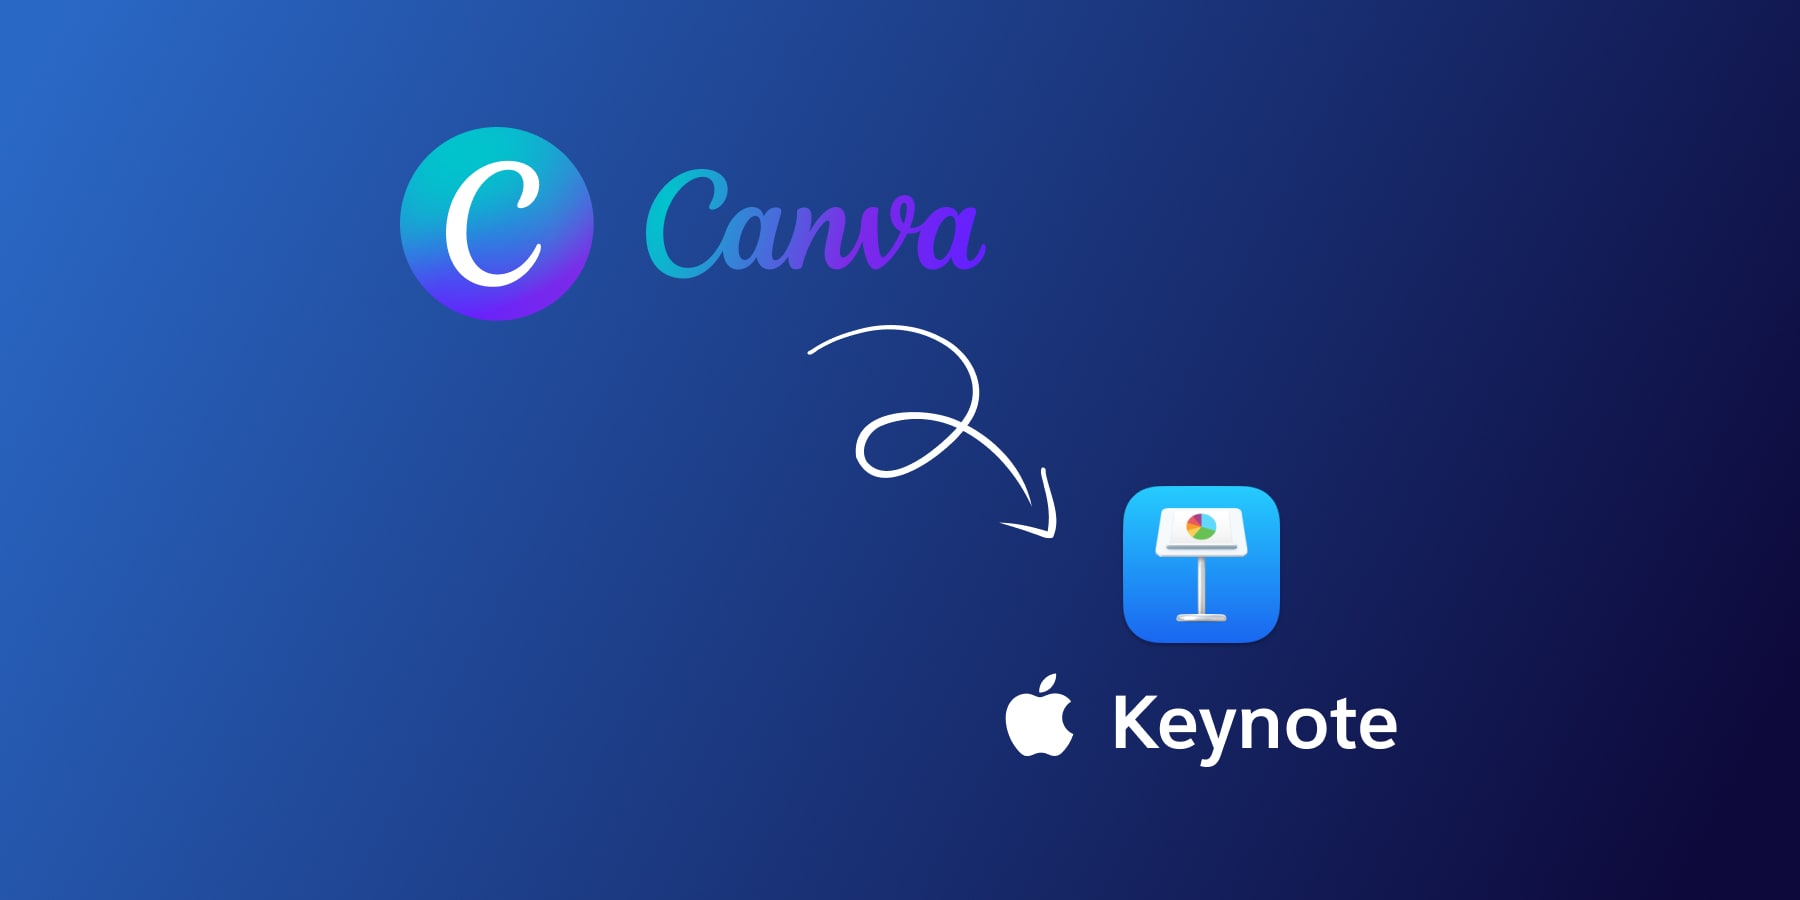 3 Methods to Convert Canva to Keynote